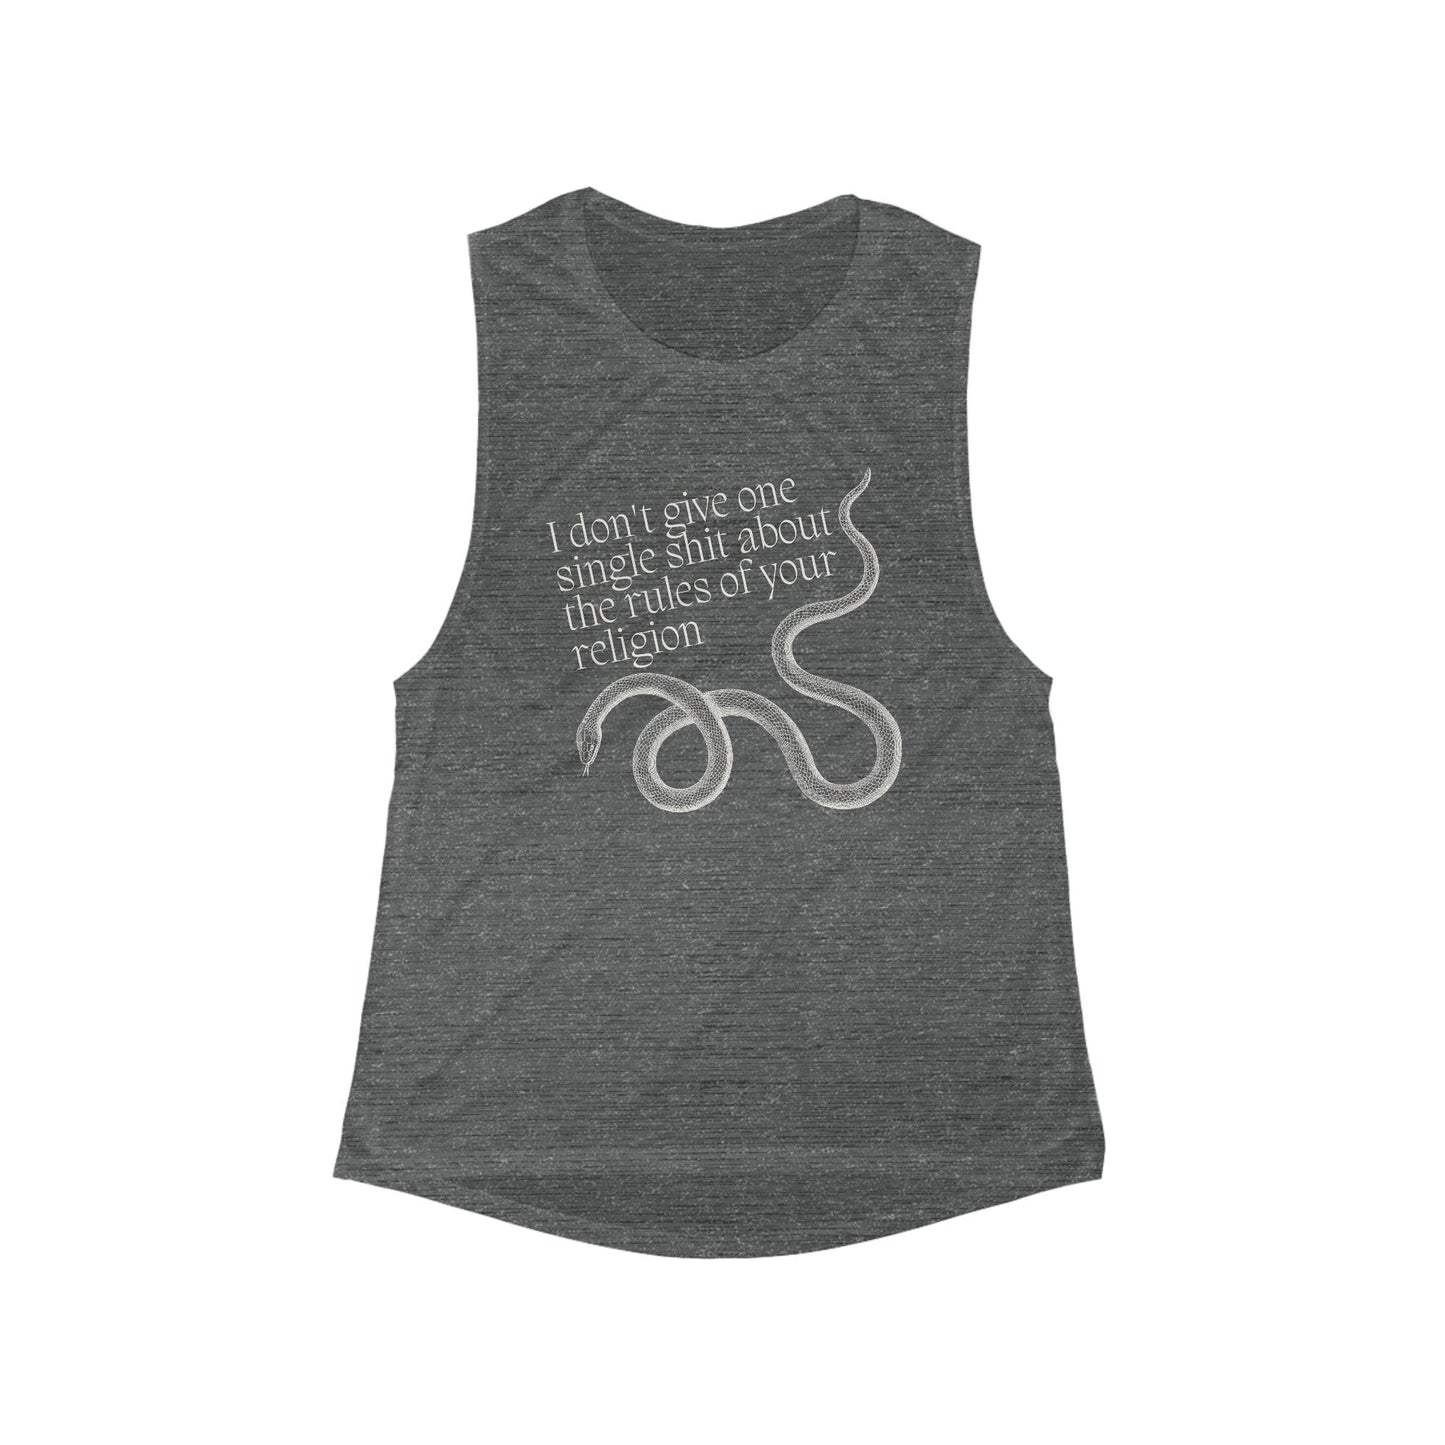 I Don't Give One Single Sh*t About the Rules of Your Religion Women's Flowy Scoop Muscle Tank in Snake Motif